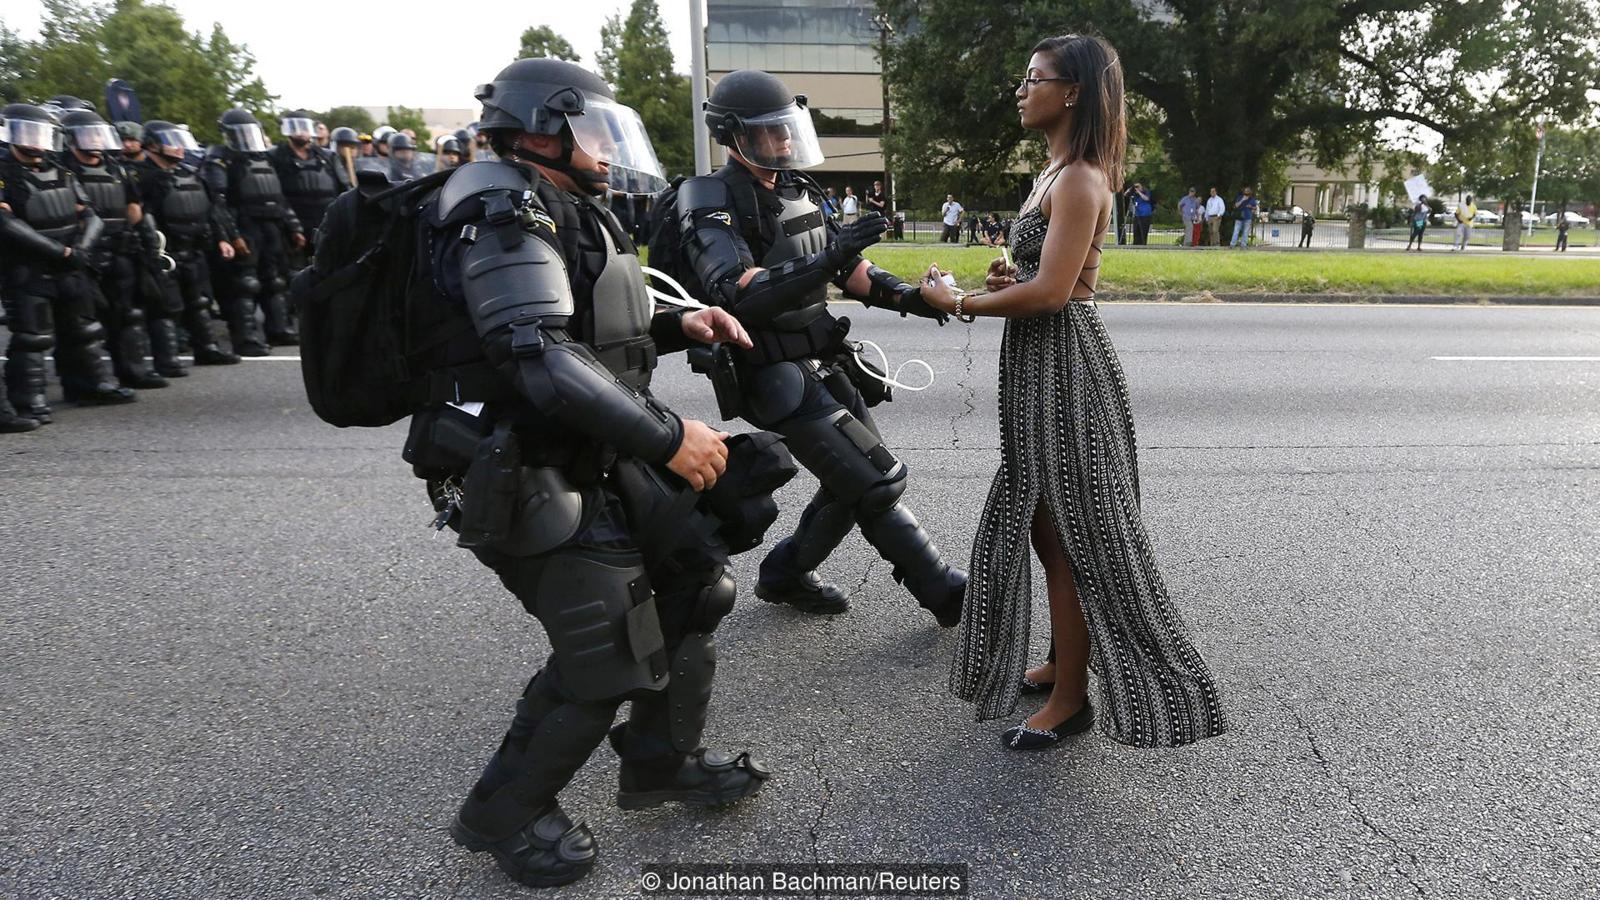 Woman protester in Baton Rouge, Louisiana in 2016, Leshia Evans being arrested at a Black Lives Matter protest.